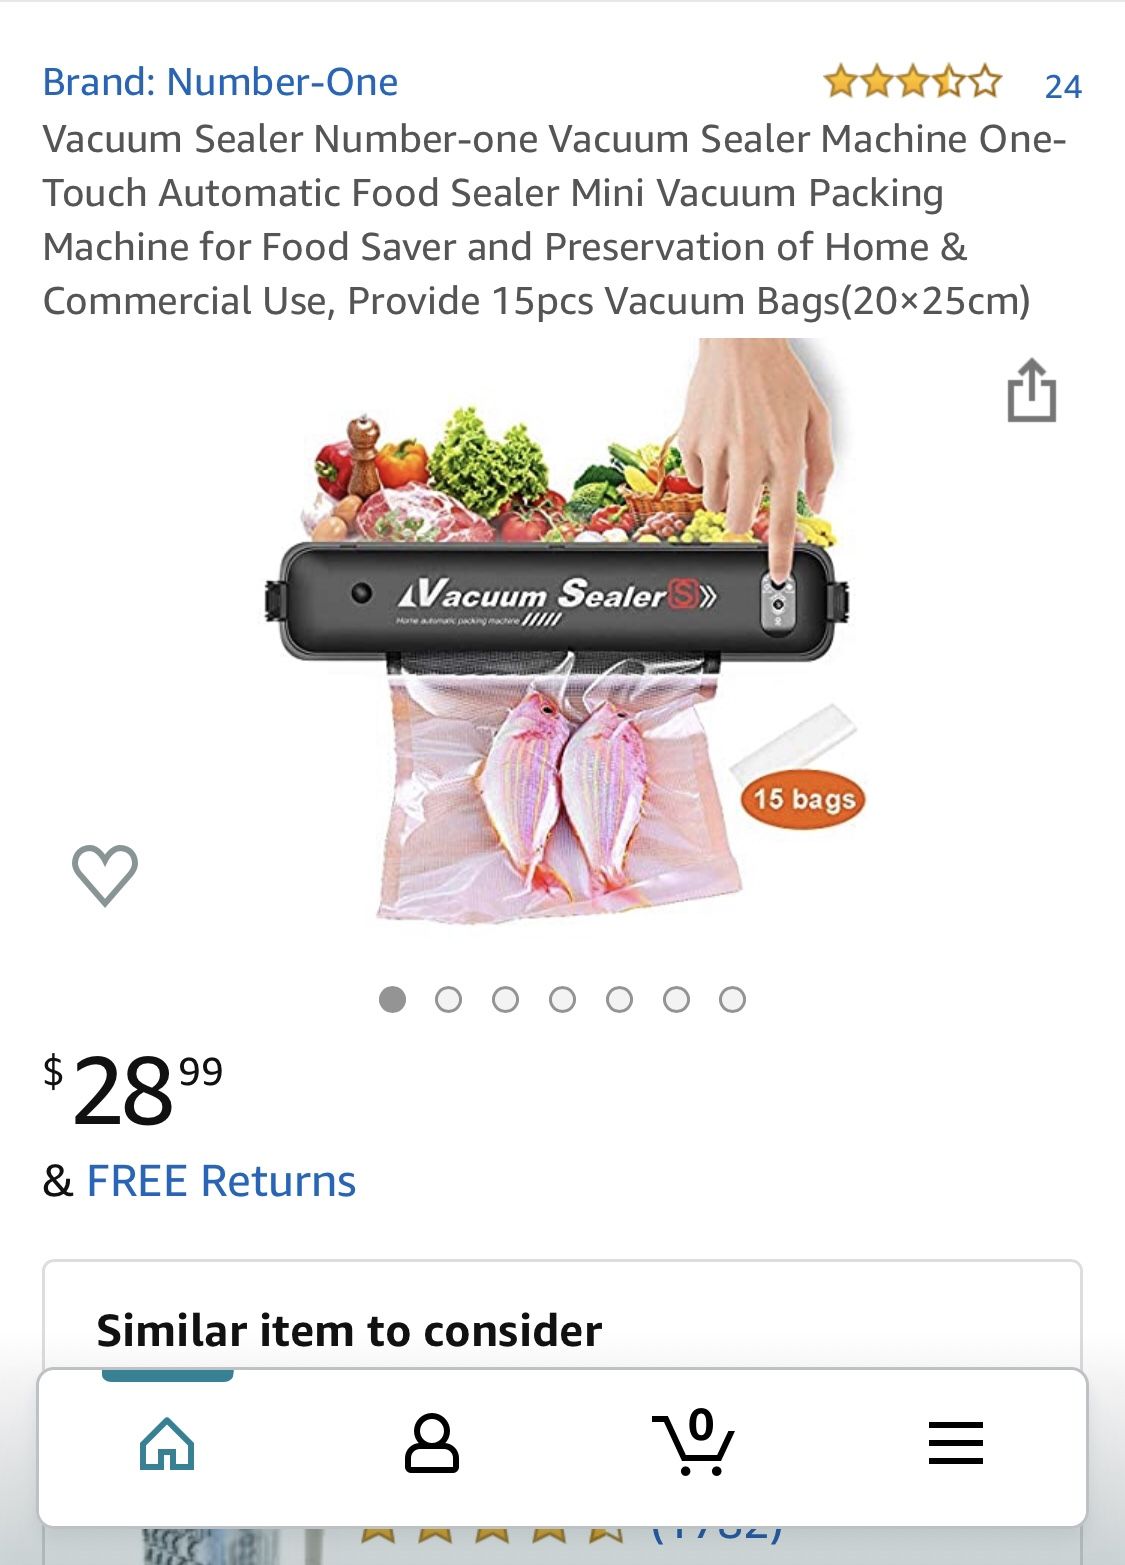 Vacuum sealer comes with bags